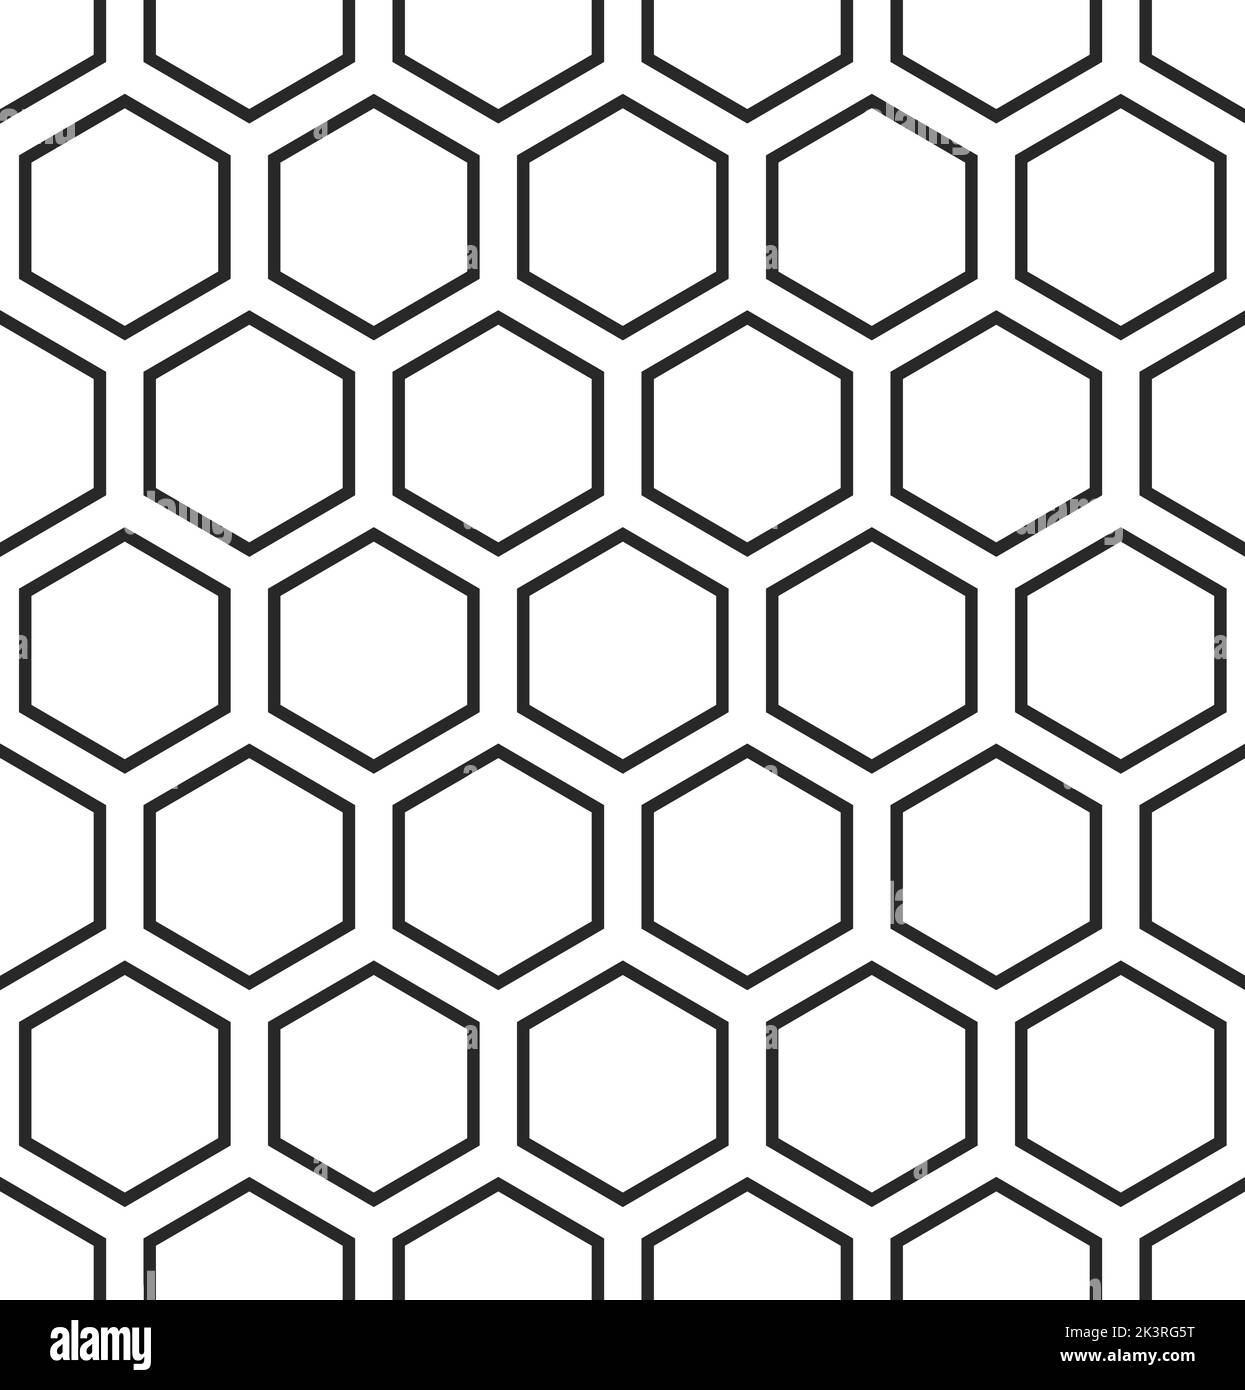 Hexagon pattern geometry background, abstract texture design paper vintage Stock Vector